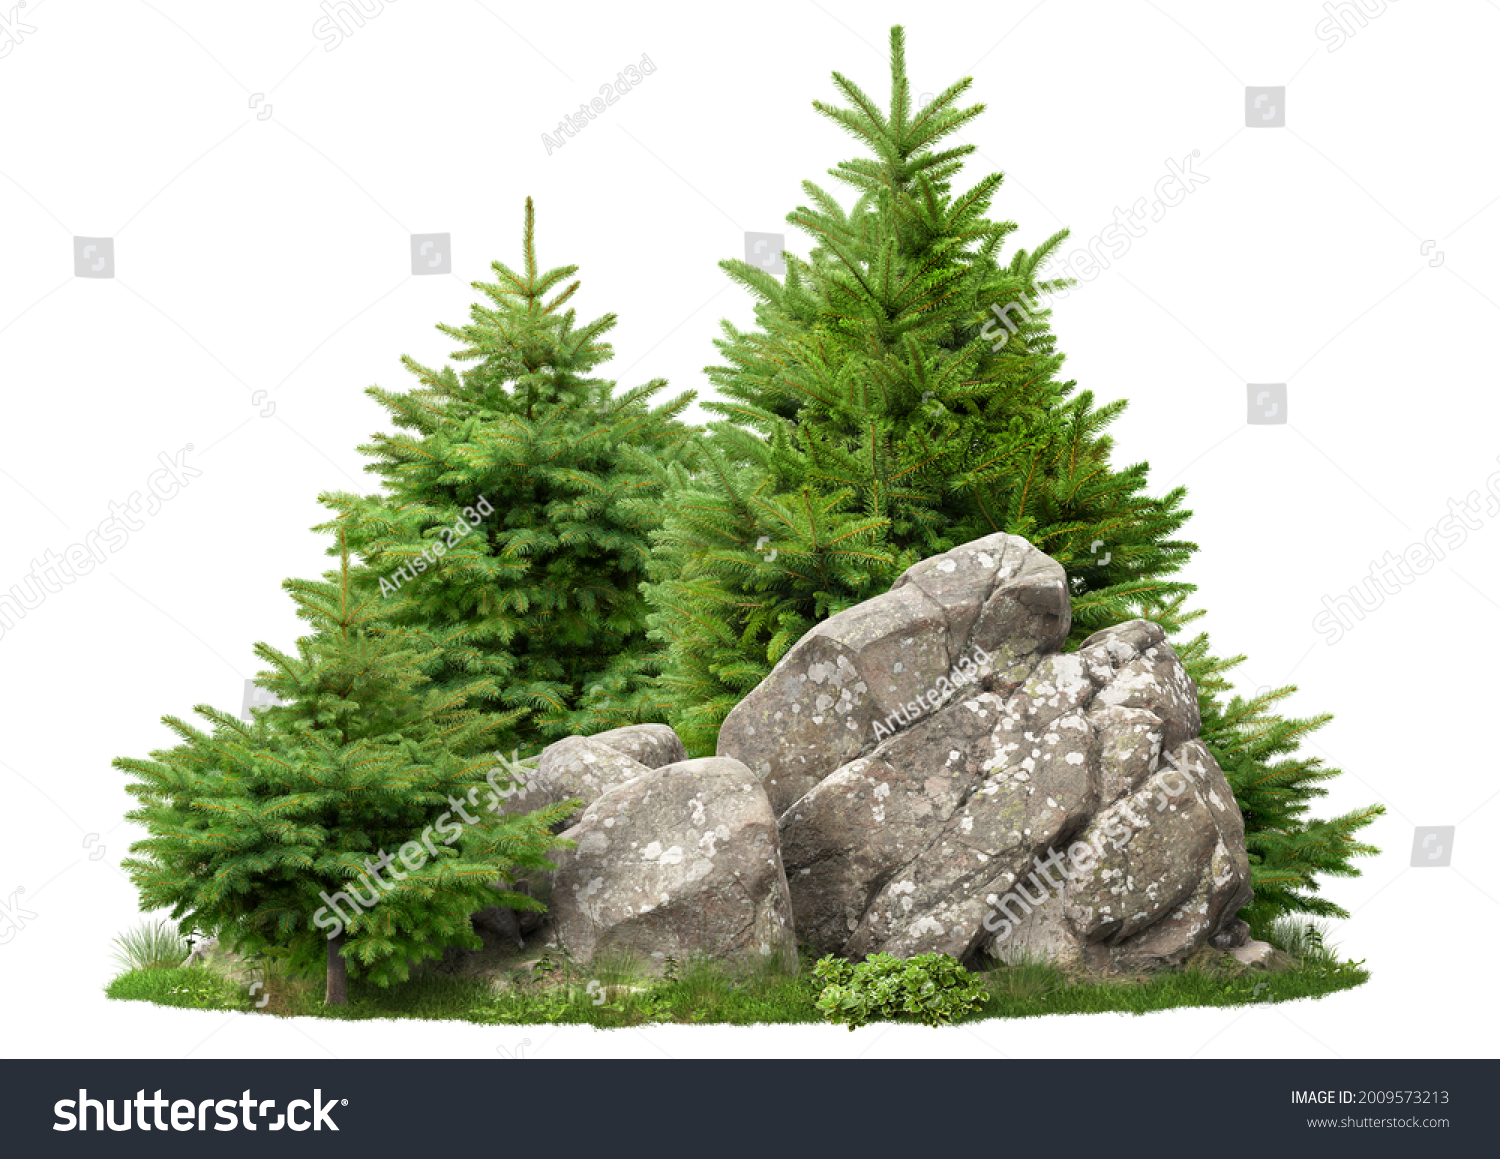 Cutout rock surrounded by fir trees. Garden design isolated on white background. Decorative shrub for landscaping. High quality clipping mask for professionnal composition #2009573213